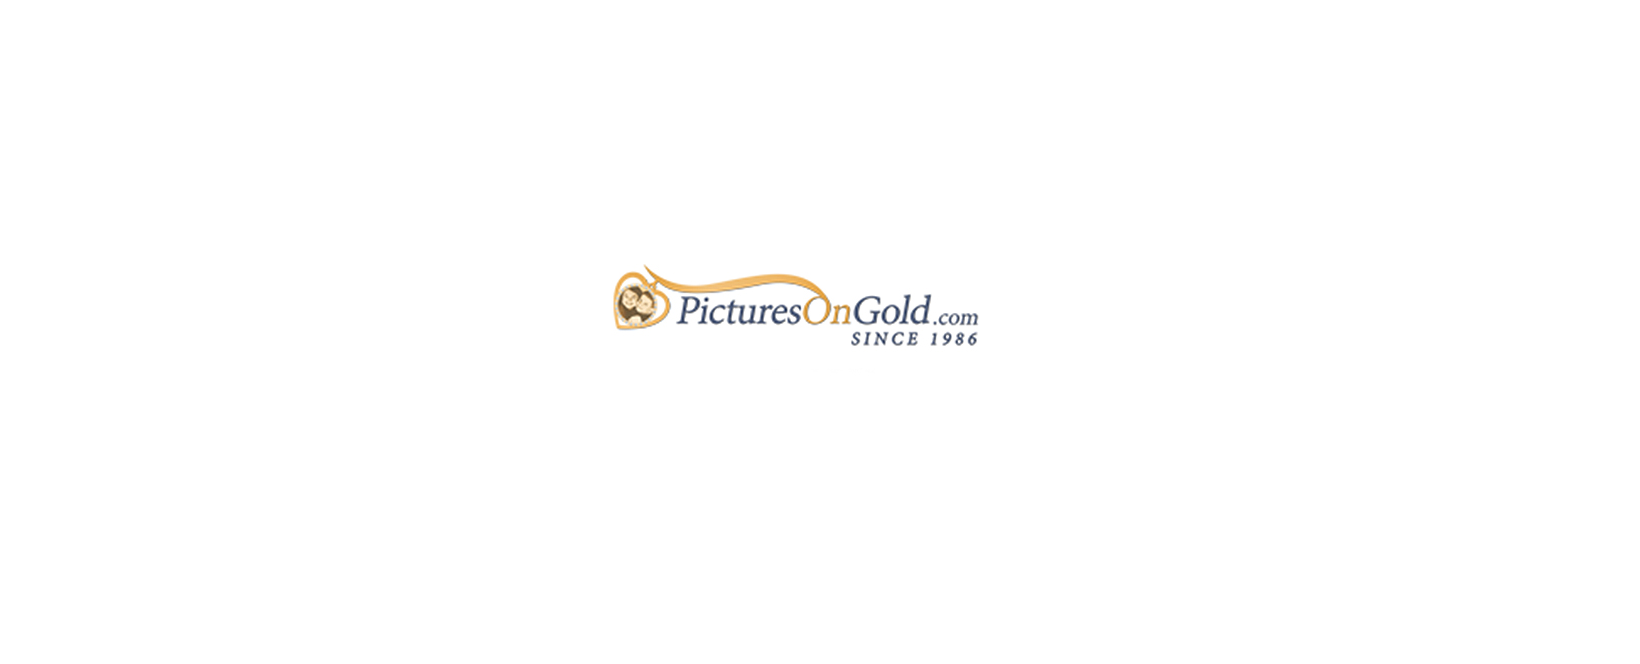 PicturesOnGold Discount Code 2023